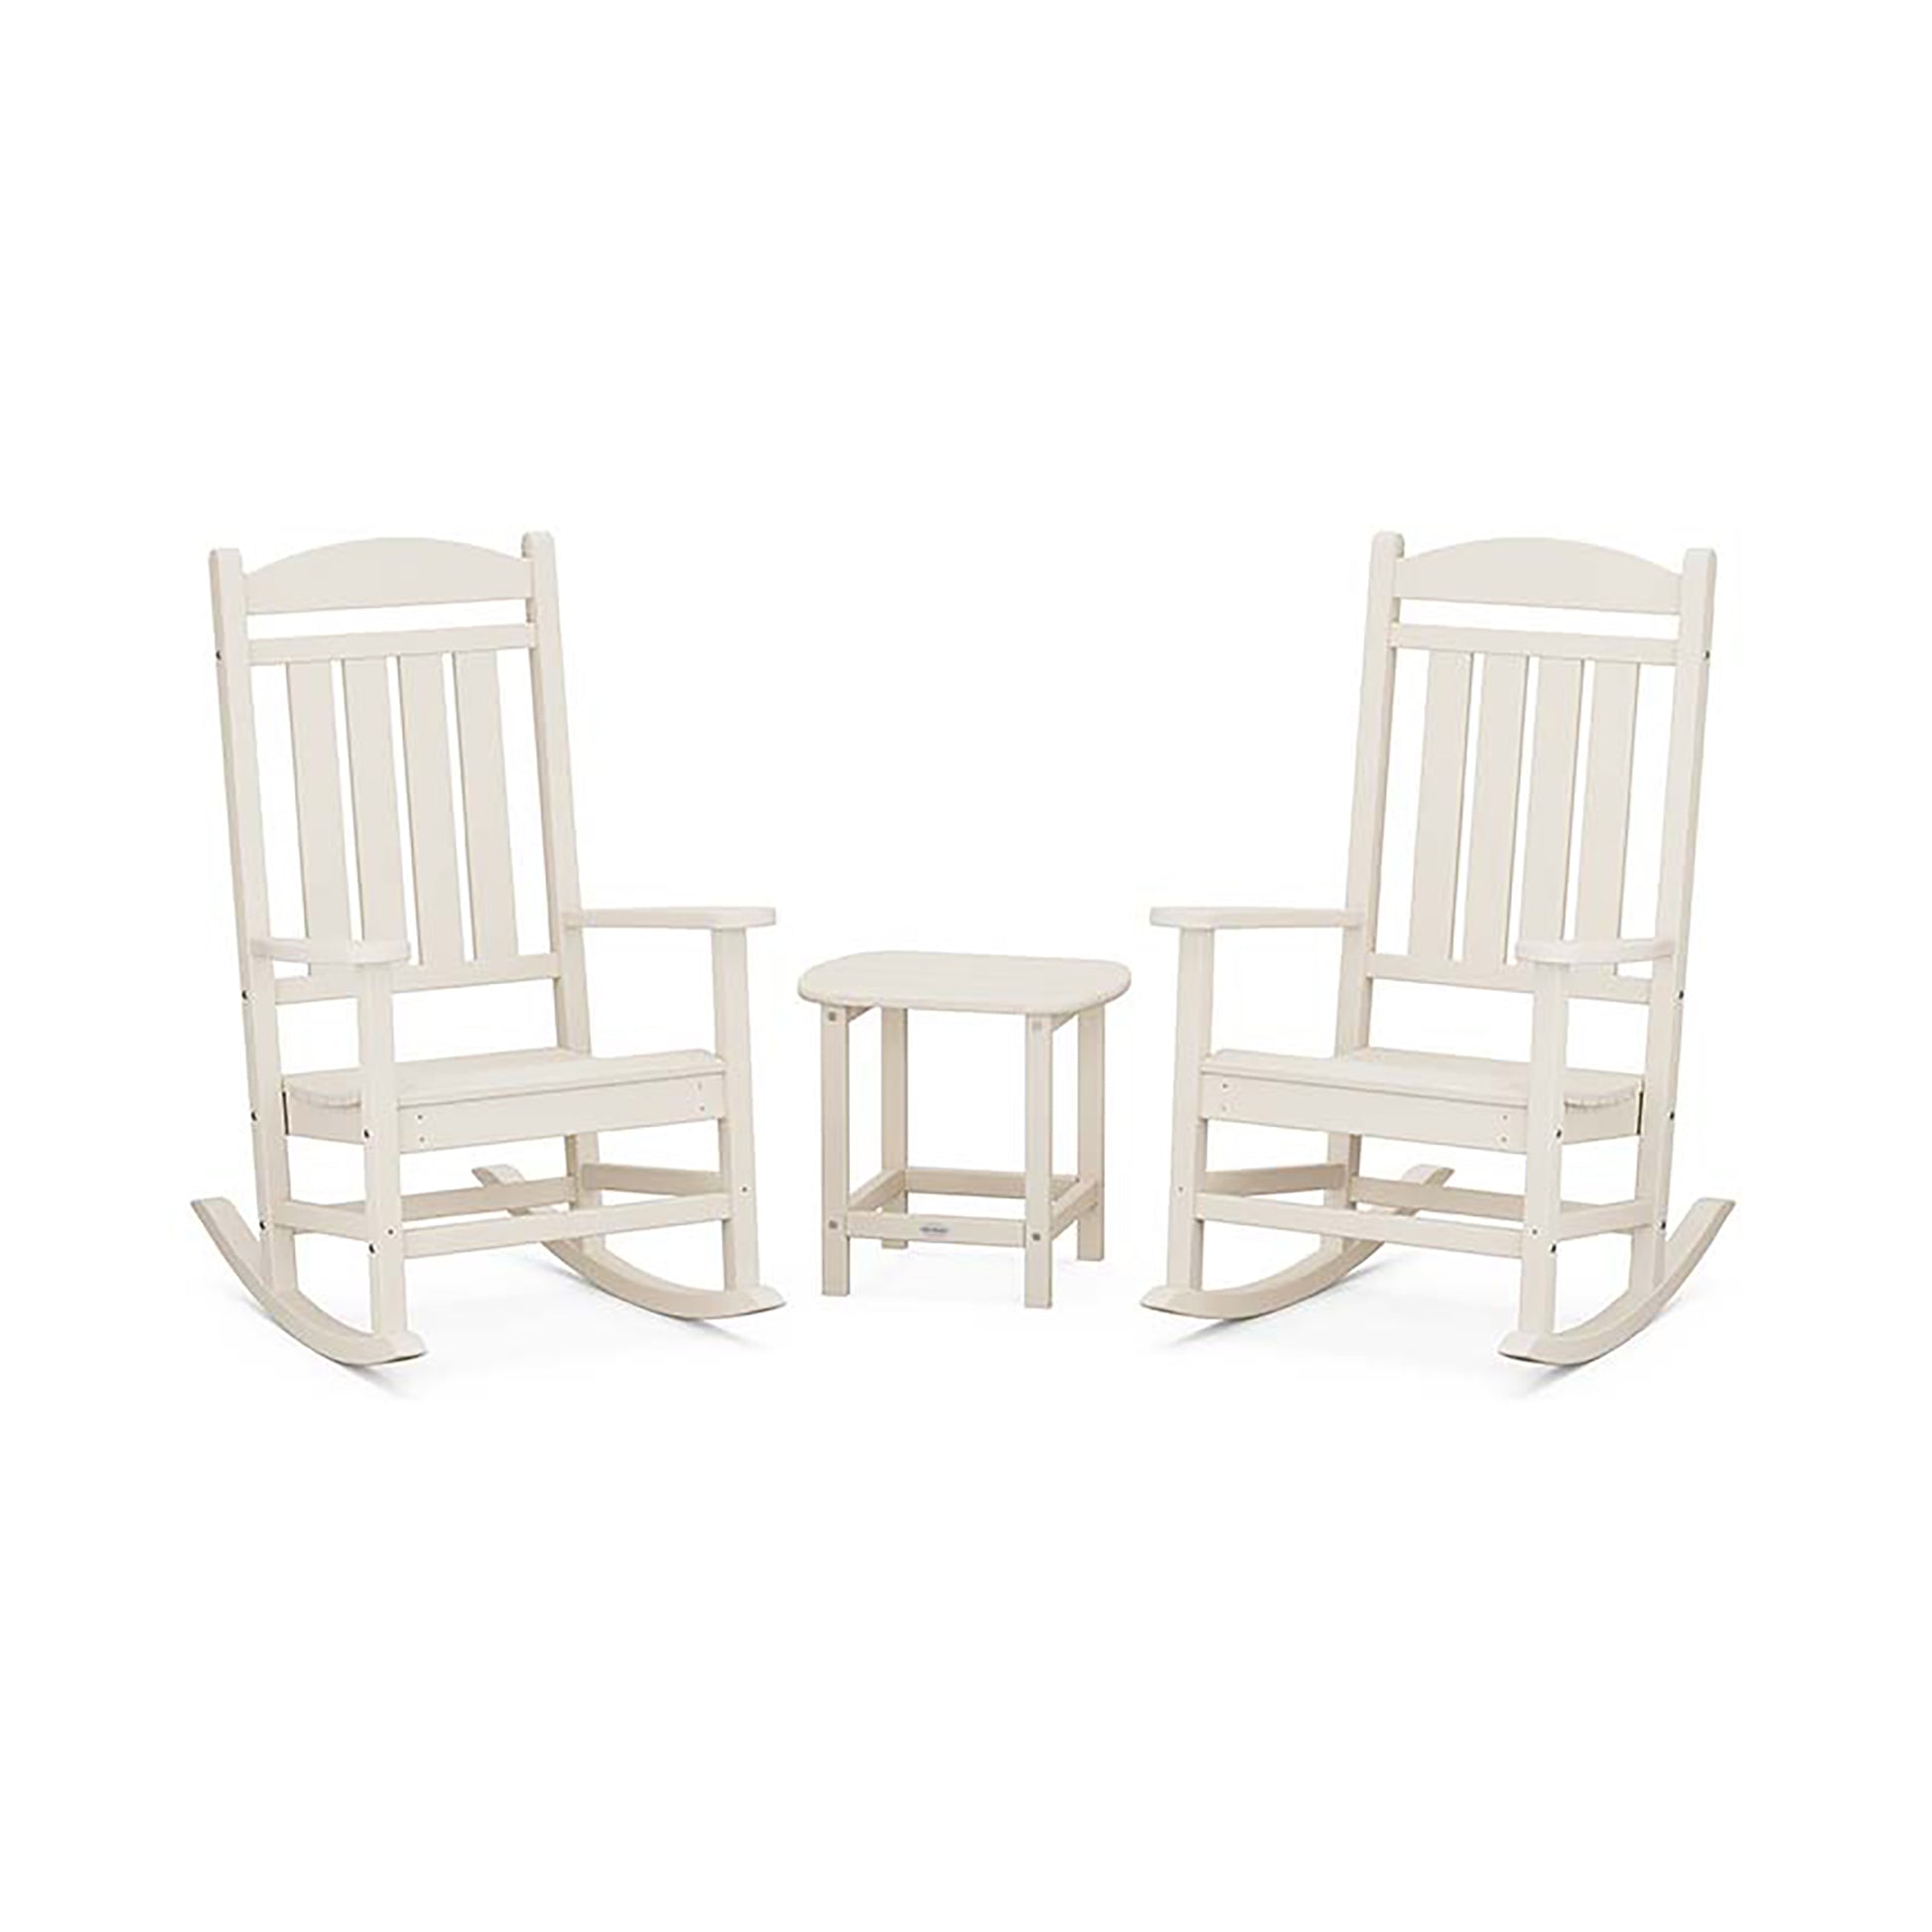 Two white POLYWOOD Presidential Outdoor Rocking Chairs and a small round stool set against a plain white background.